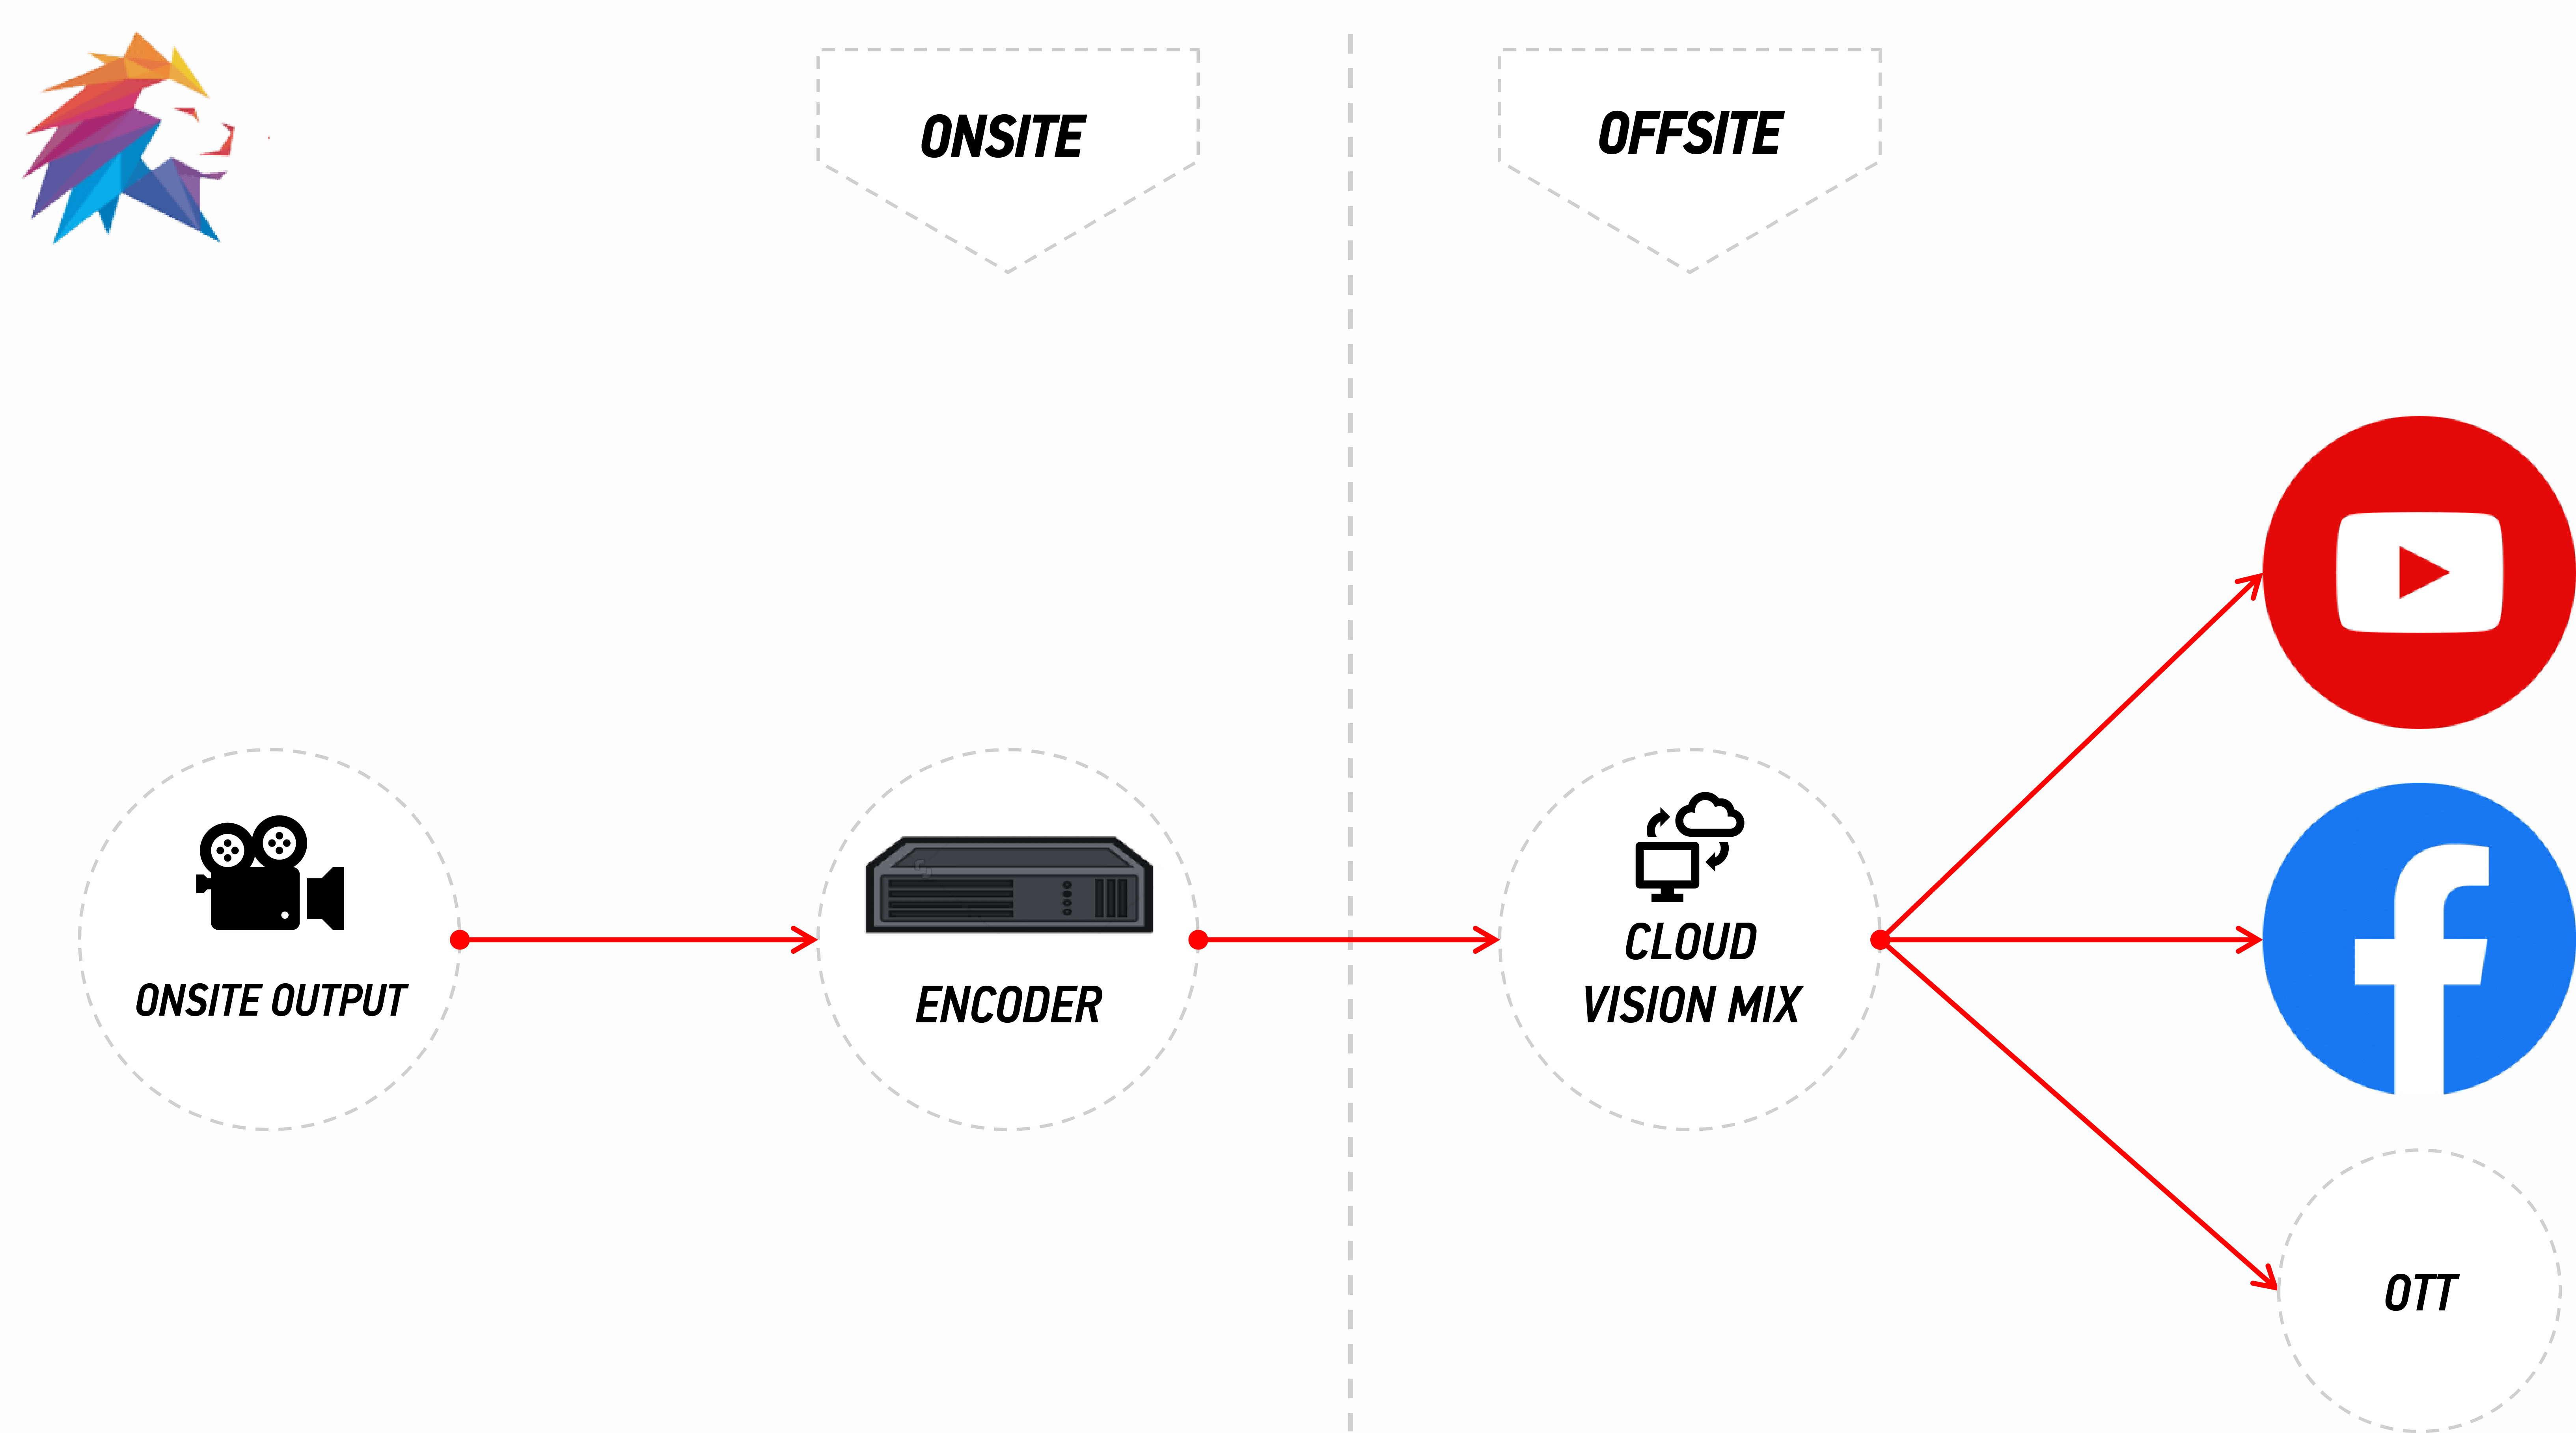 A simple diagram of a remote, cloud-based workflow, distributing a single feed to 3 seperate platforms.